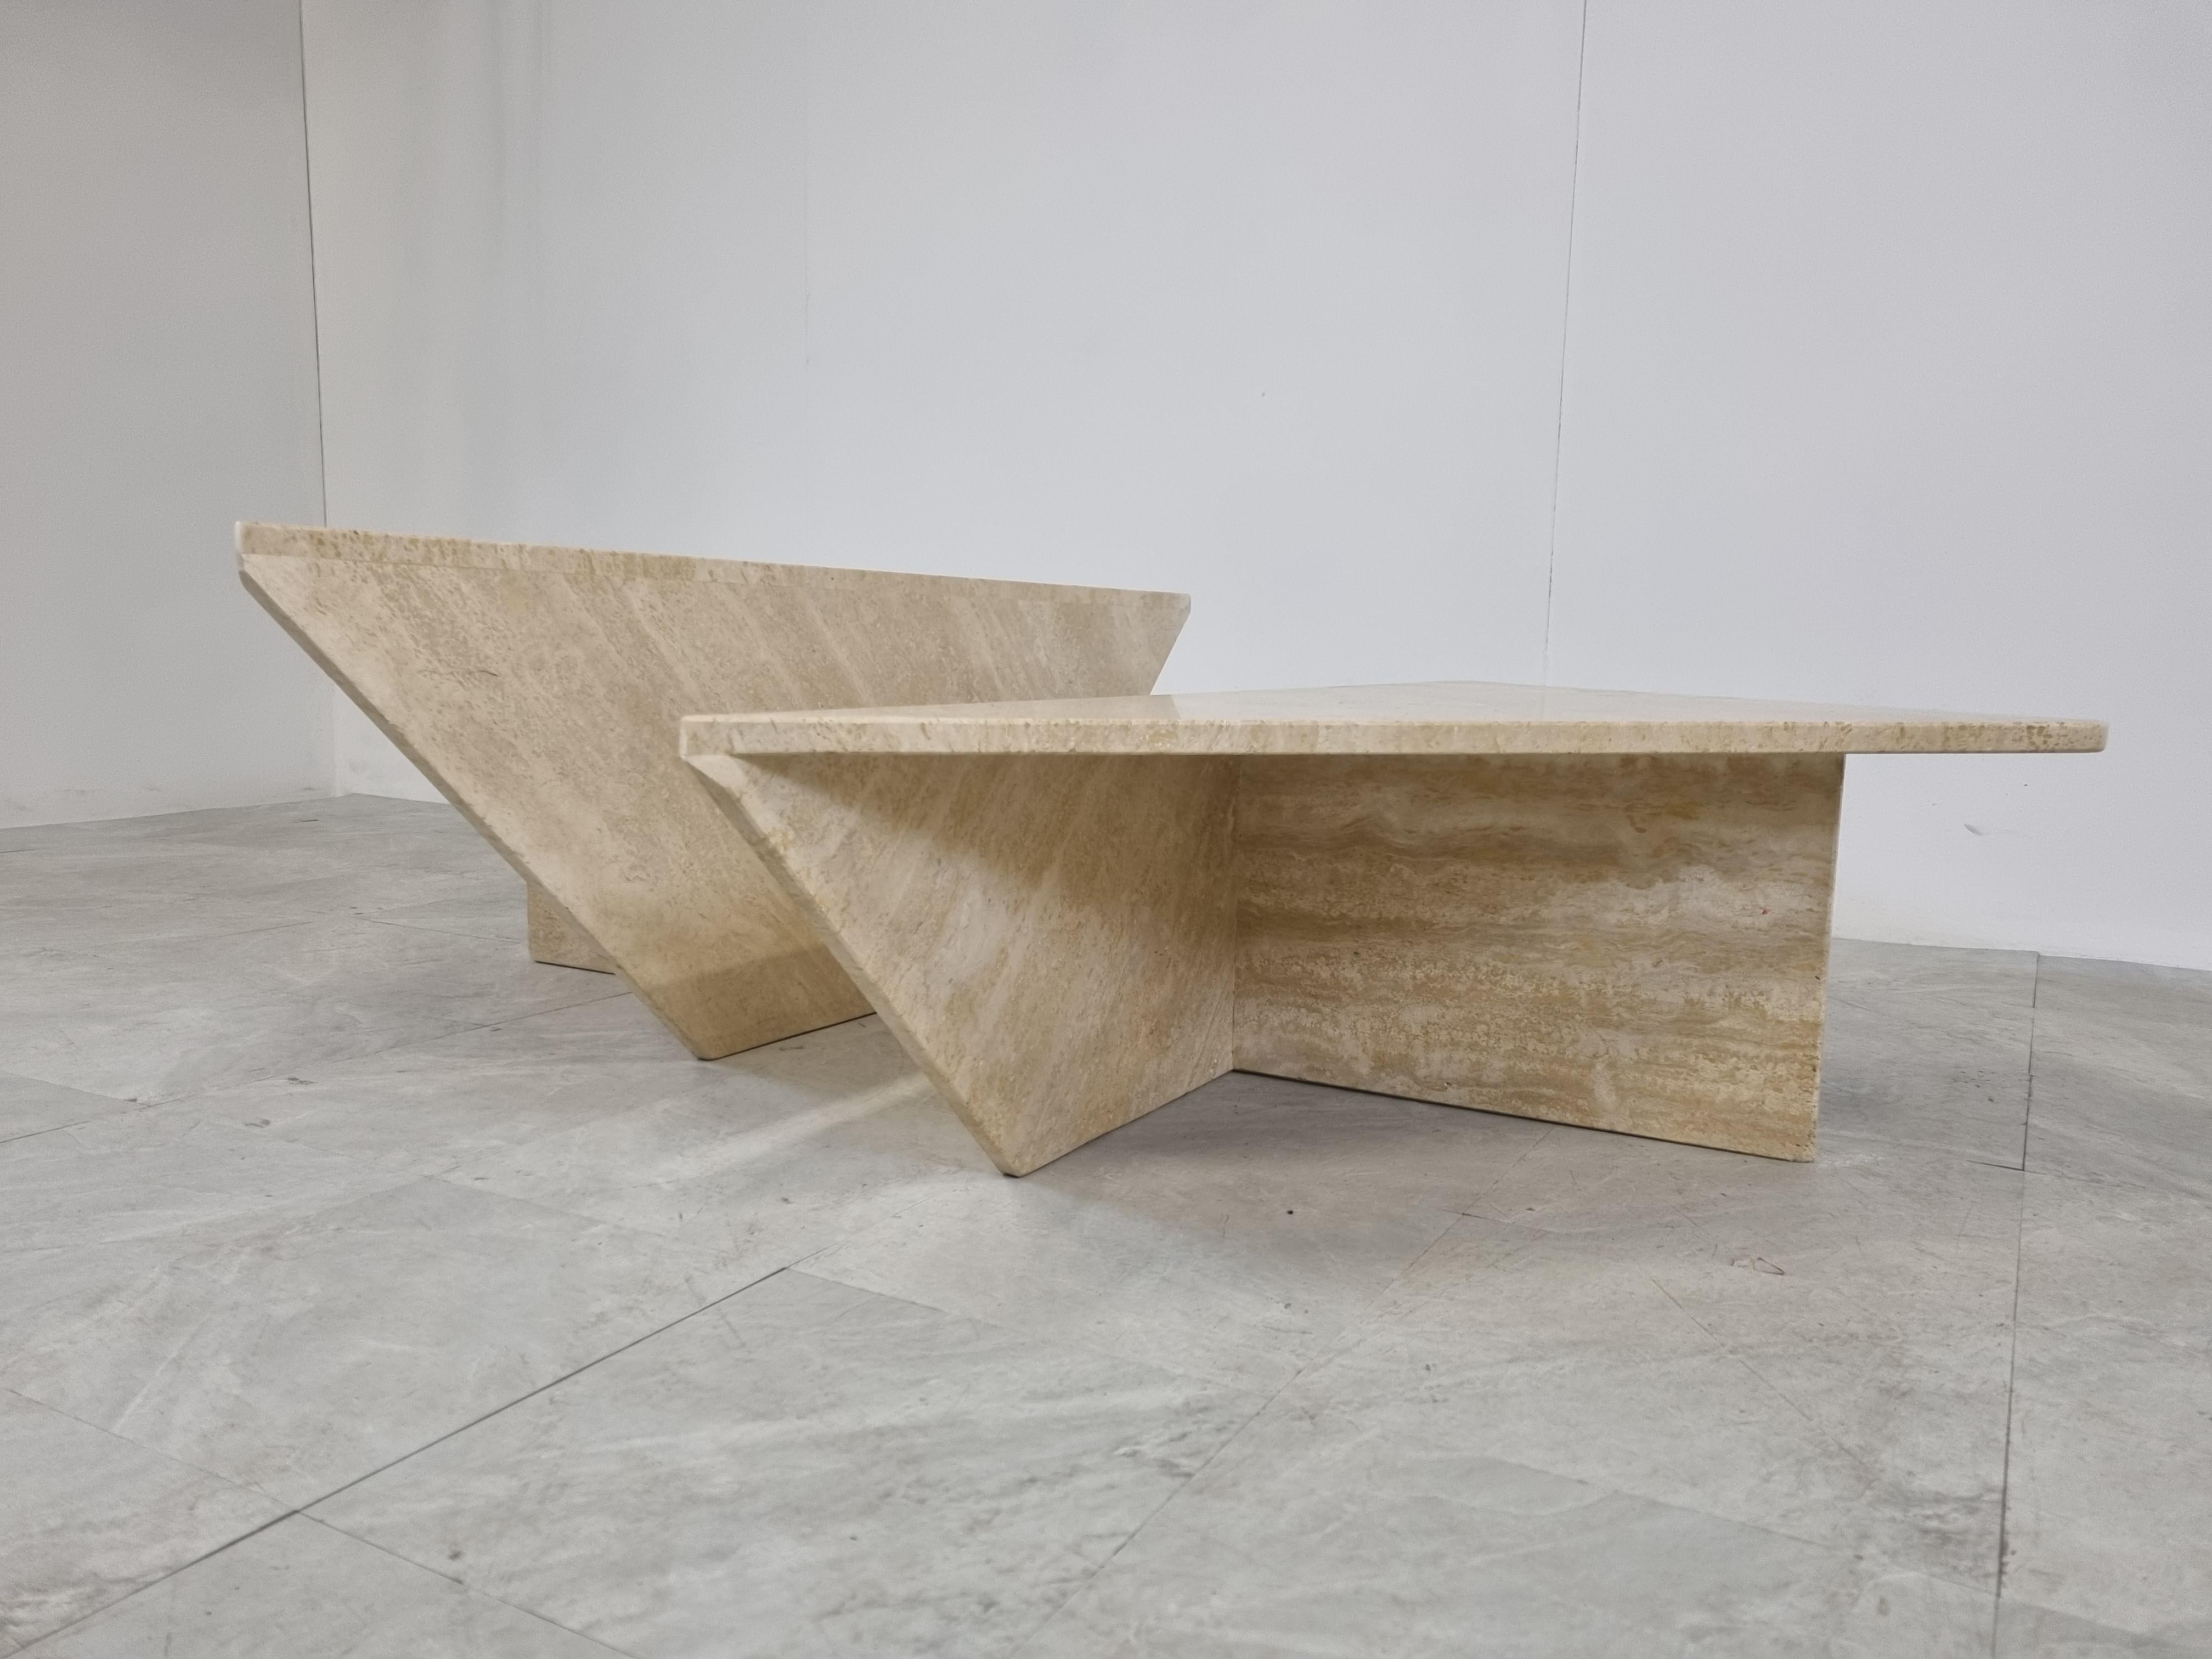 Pair of 1970s italian travertine stone triangular coffee tables by Up&Up.

Can be used as one table togheter or as two separate tables.

Good condition.

1970s - Italy

Dimensions:
Width x depth: 125cm/49.21